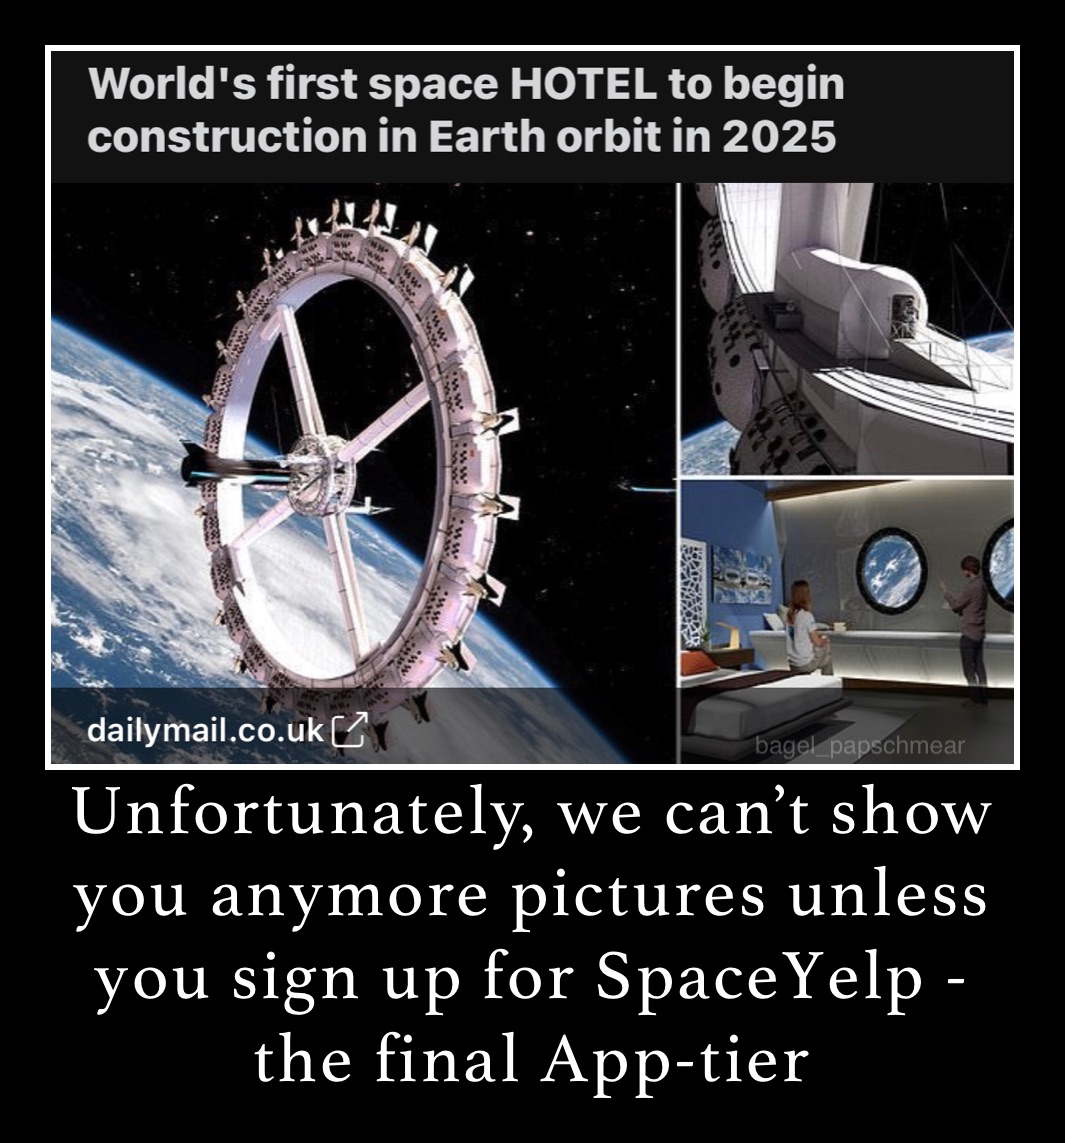 Unfortunately, we can’t show you anymore pictures unless you sign up for SpaceYelp - the final App-tier